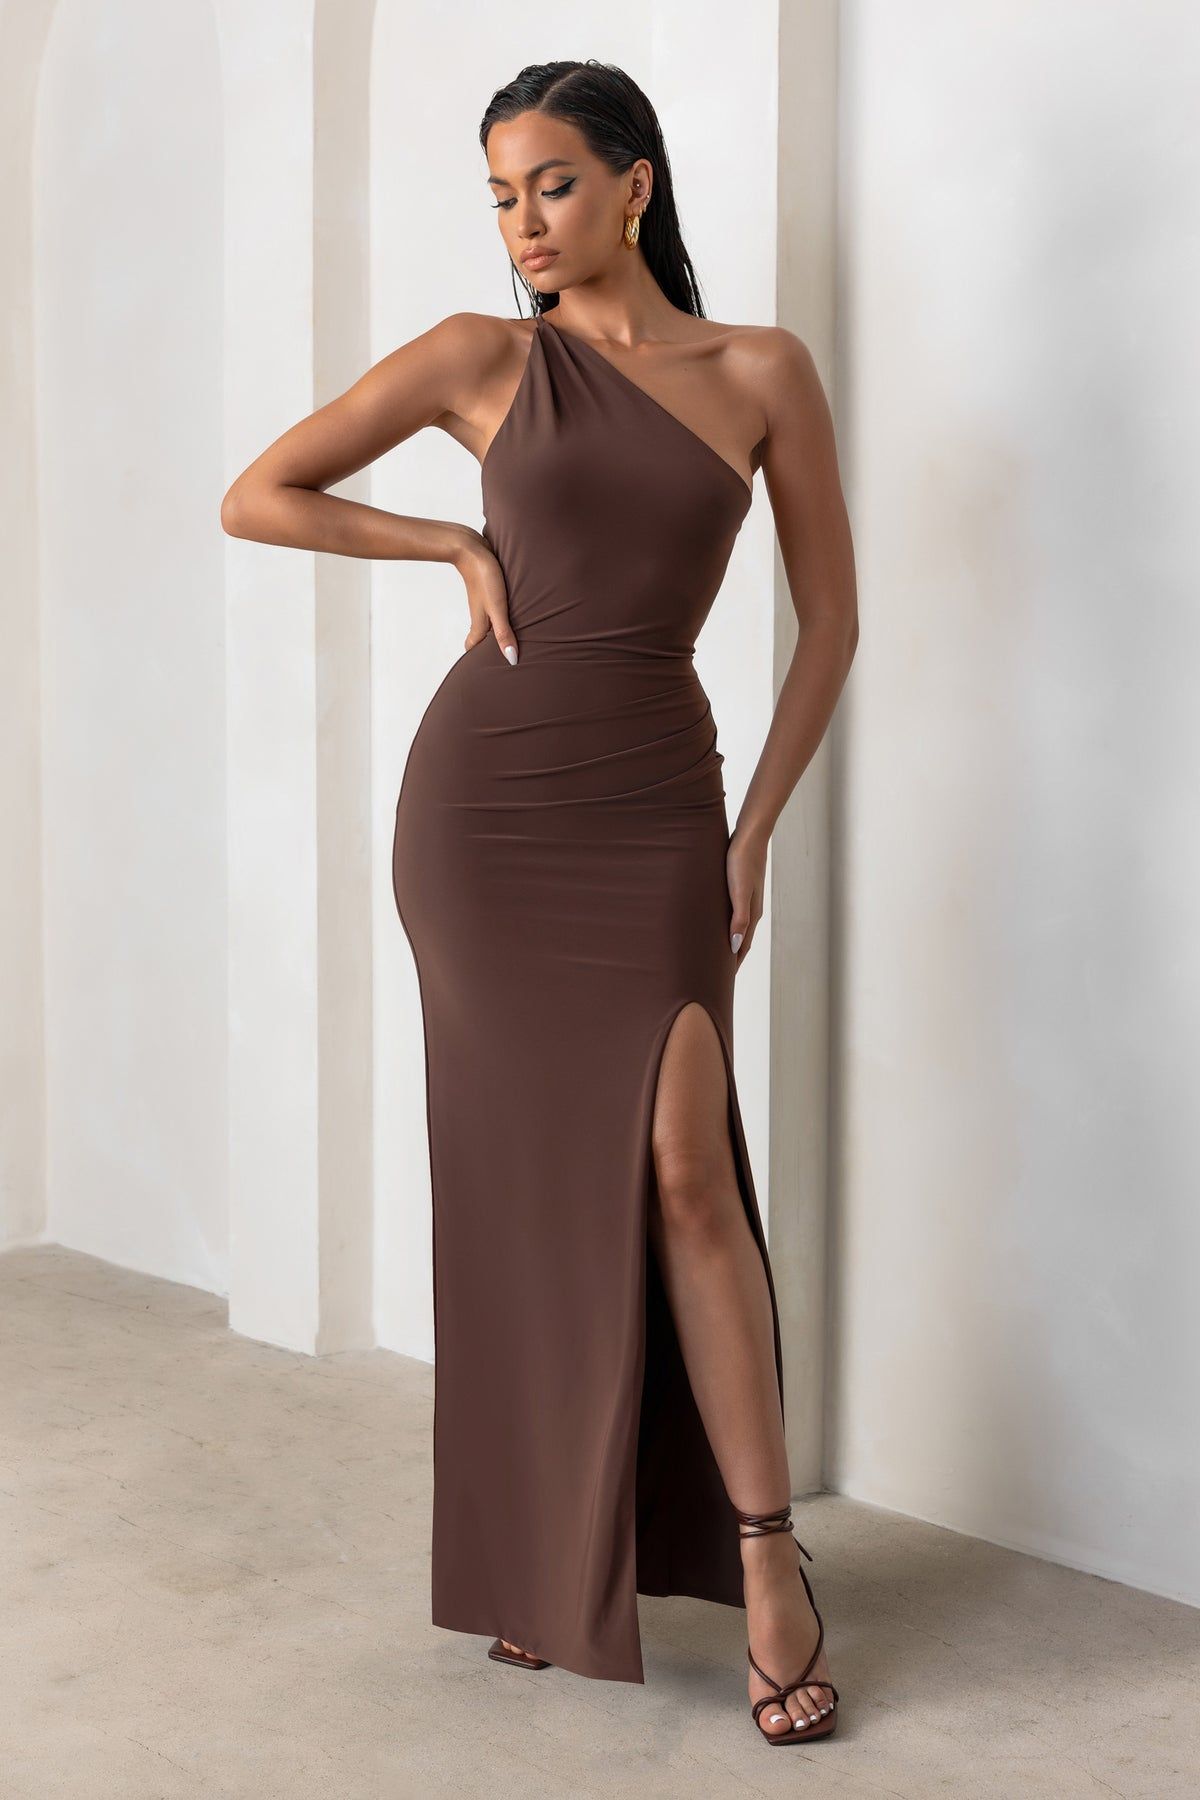 Chocolate Brown Dress Outfit
  Ideas